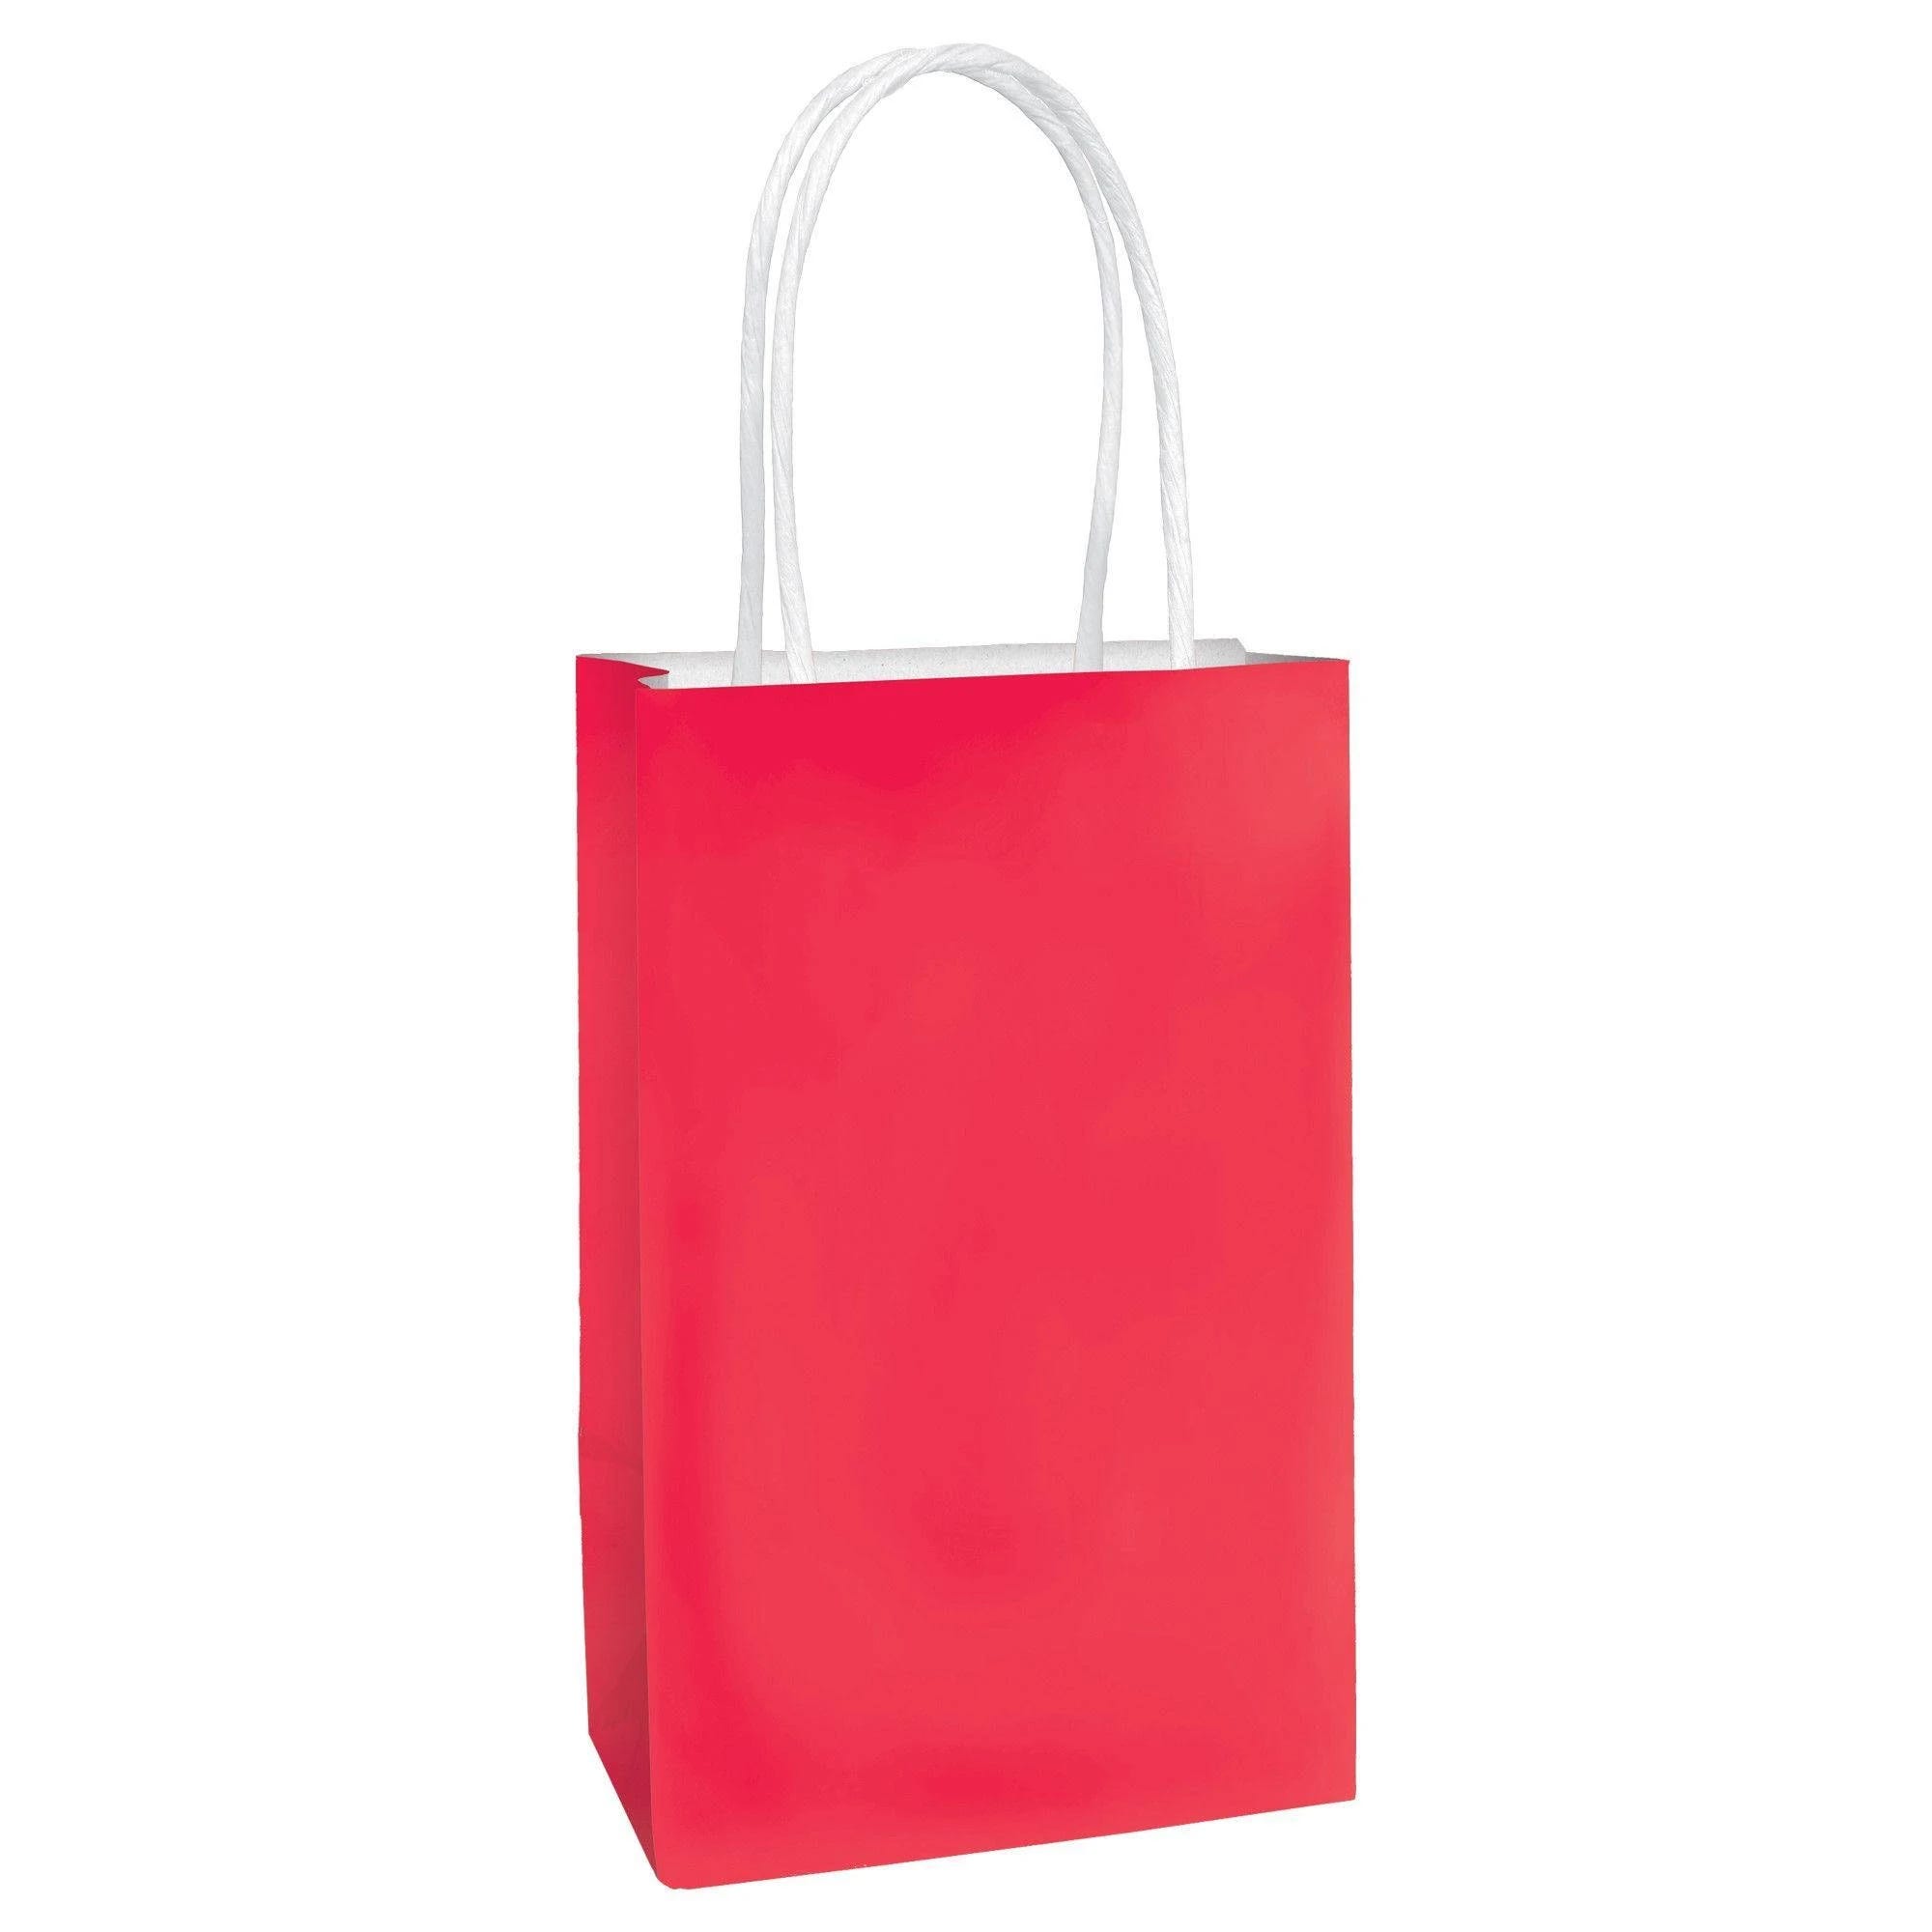 Stylish Red Small Paper Bag | Image